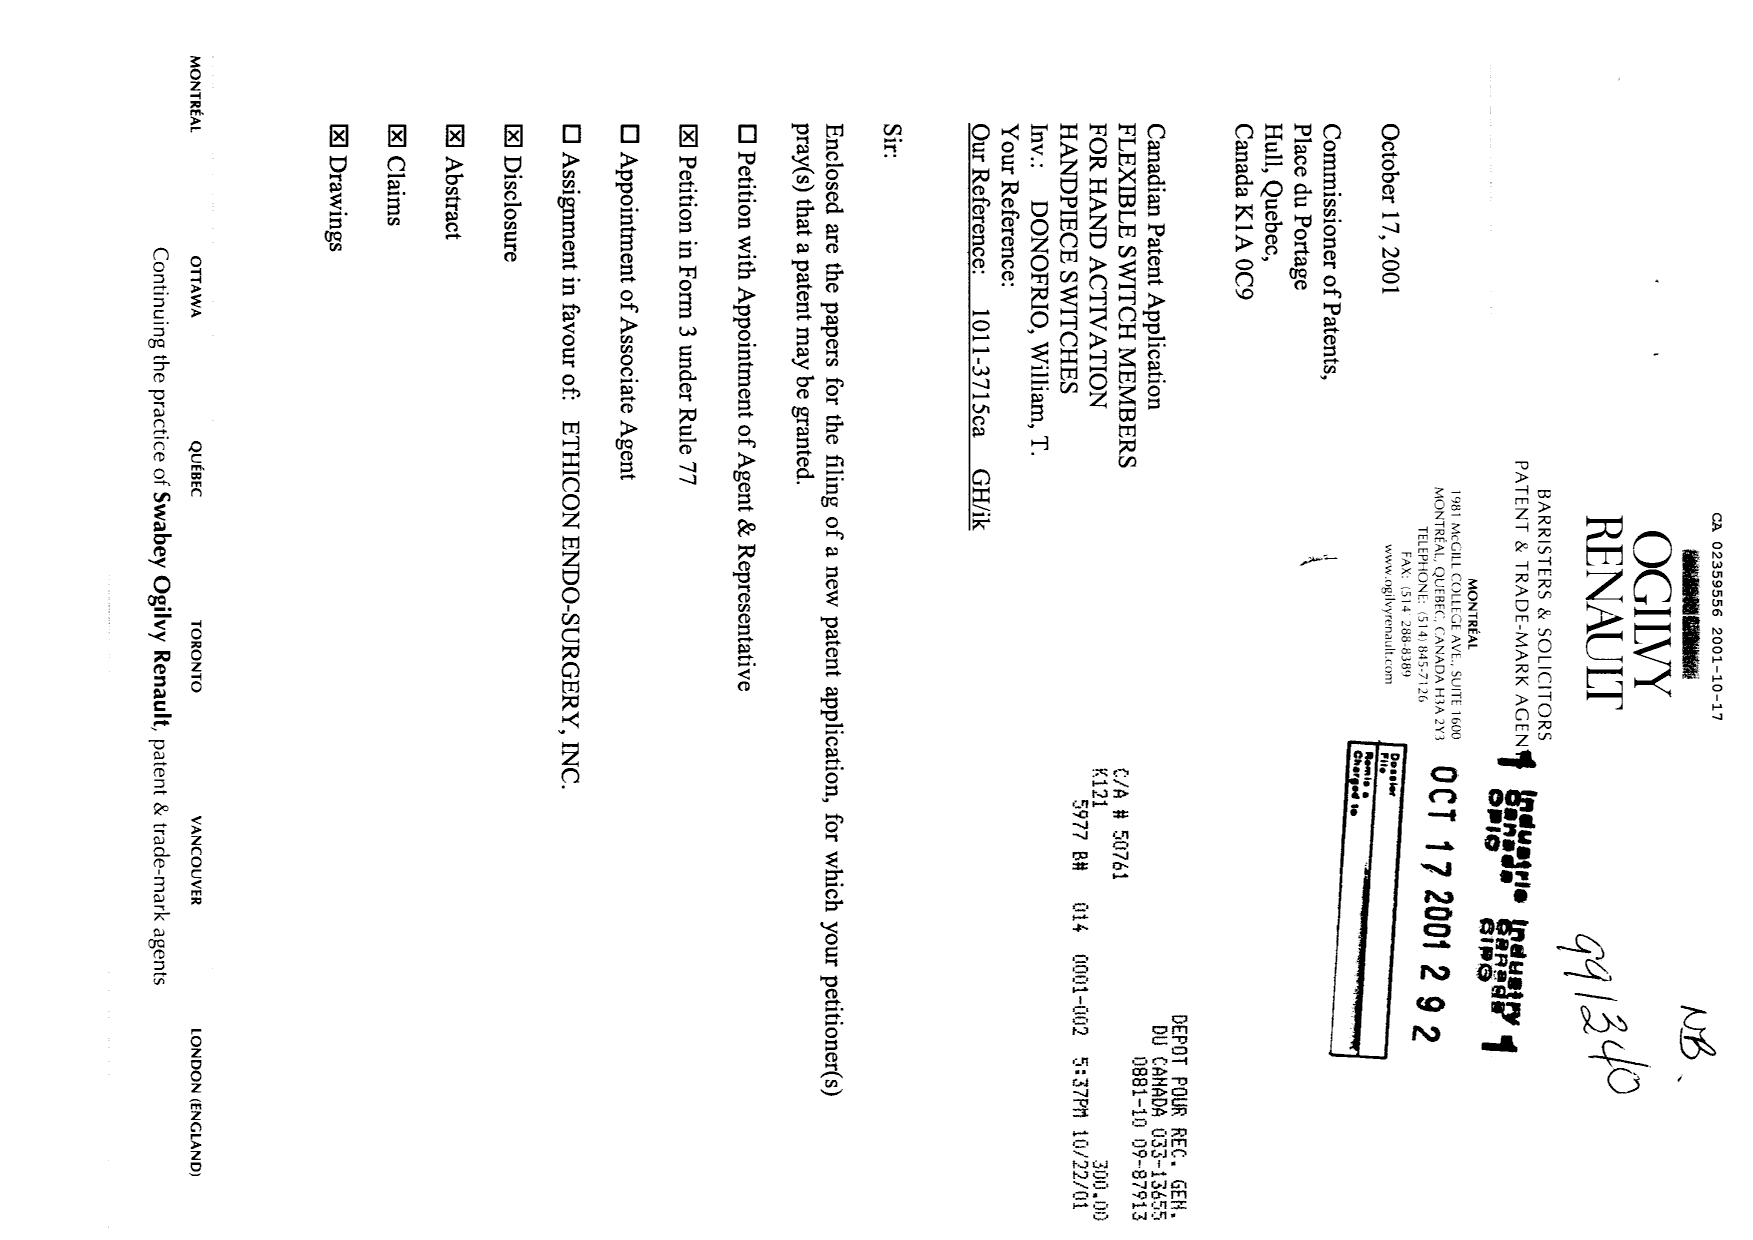 Canadian Patent Document 2359556. Assignment 20011017. Image 1 of 3